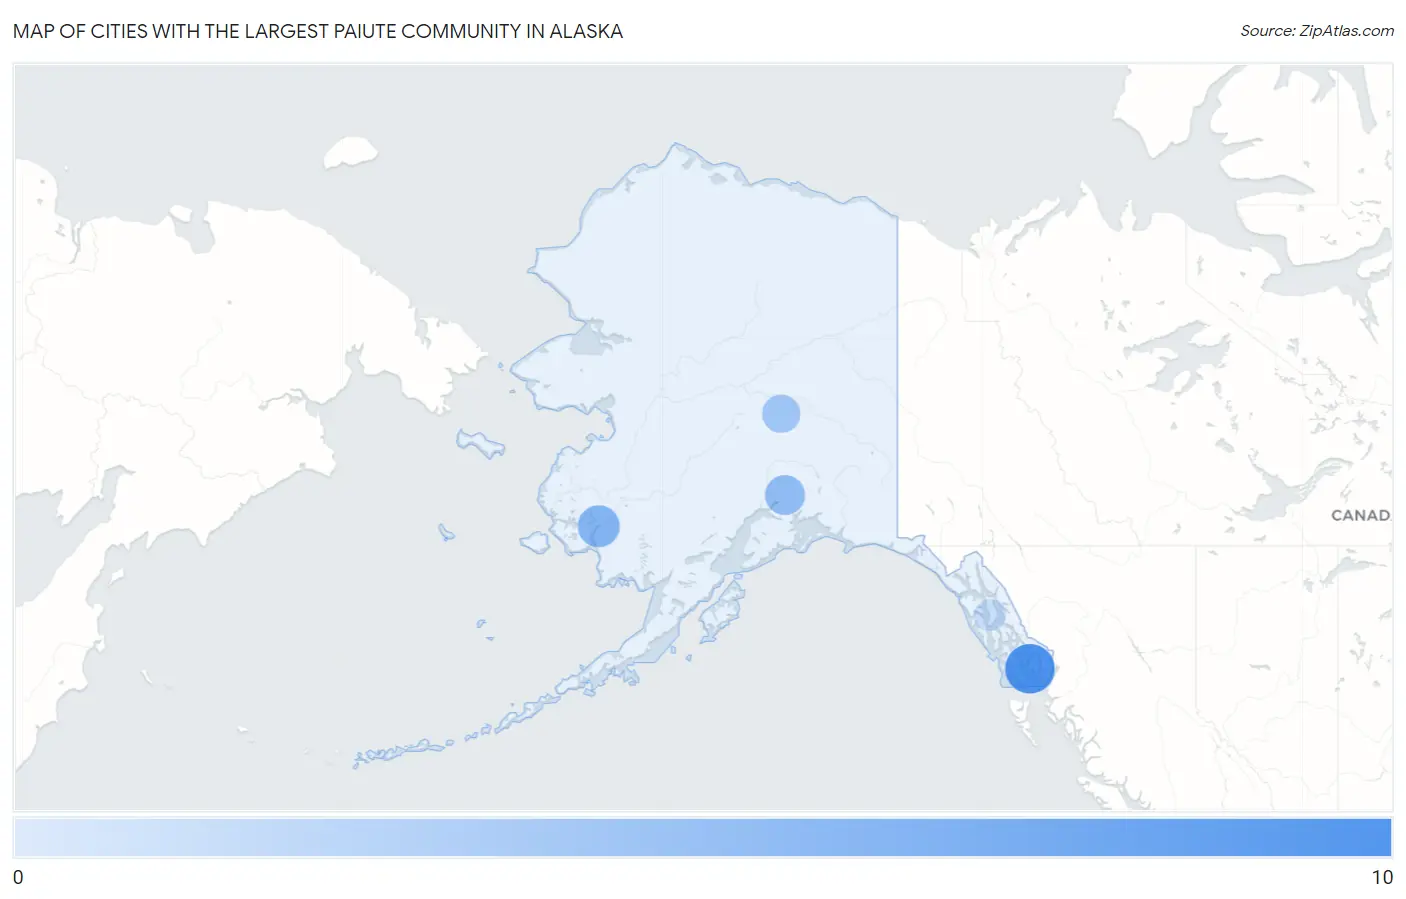 Cities with the Largest Paiute Community in Alaska Map